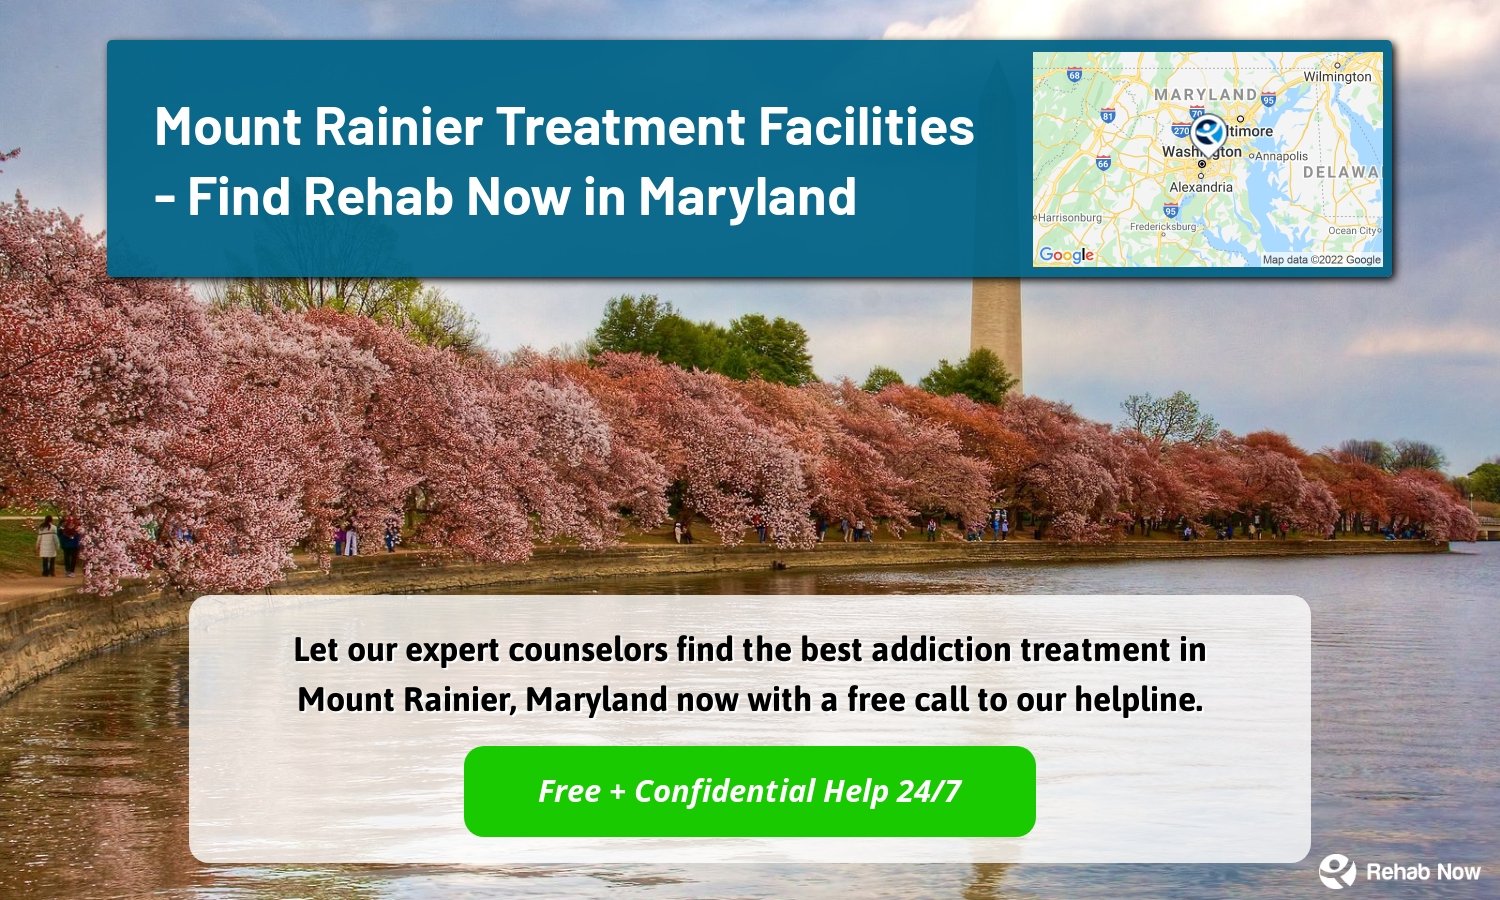 Let our expert counselors find the best addiction treatment in Mount Rainier, Maryland now with a free call to our helpline.